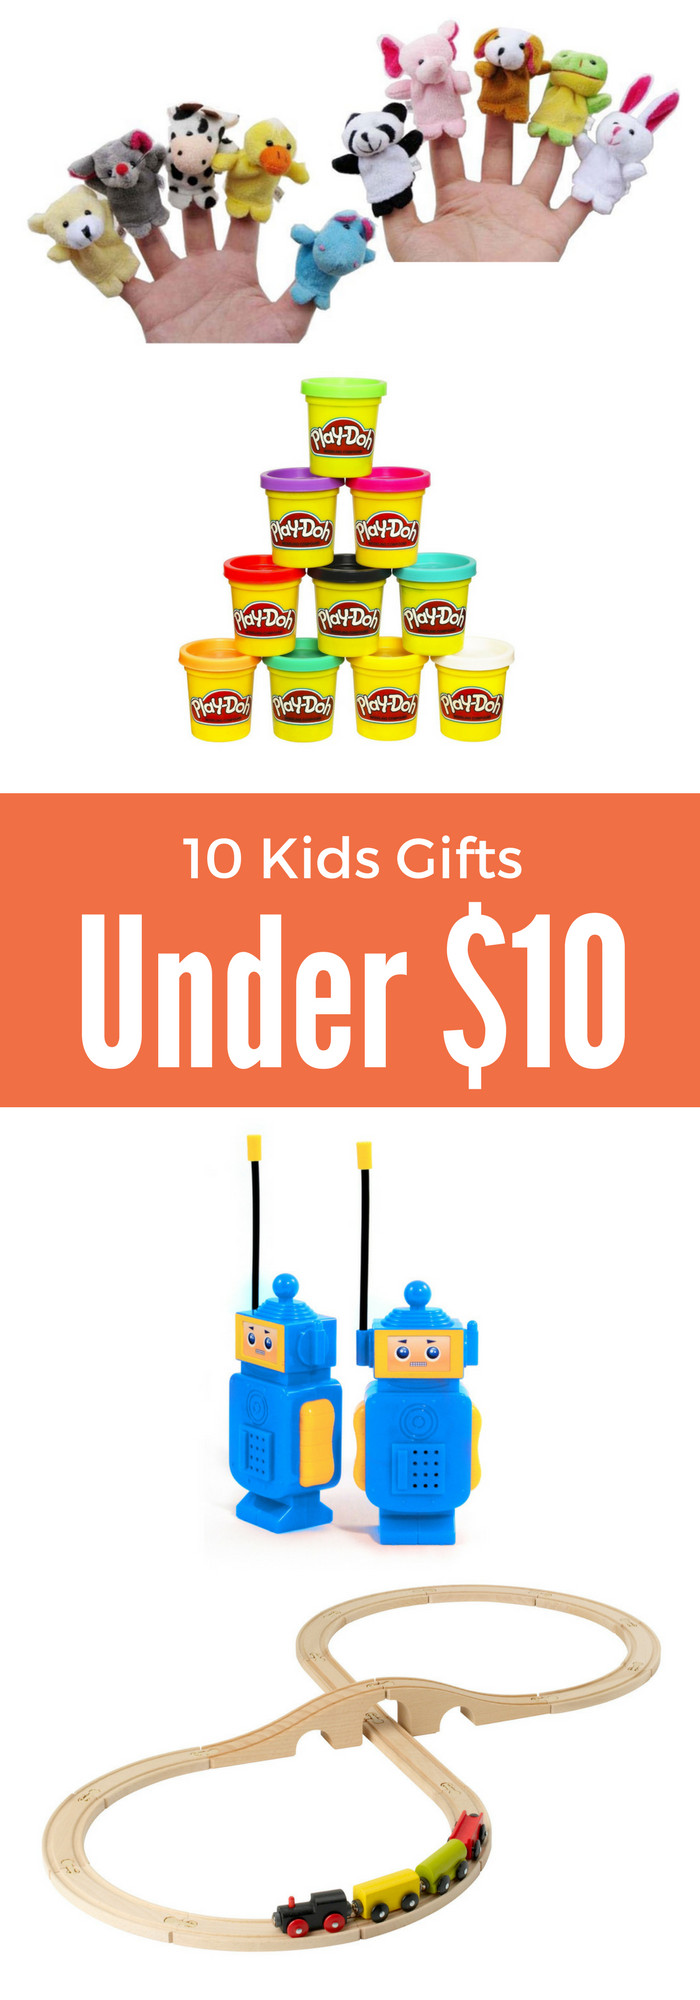 Kids Gift Under $10
 Headed to a birthday party 10 Kids Gifts for $10 and